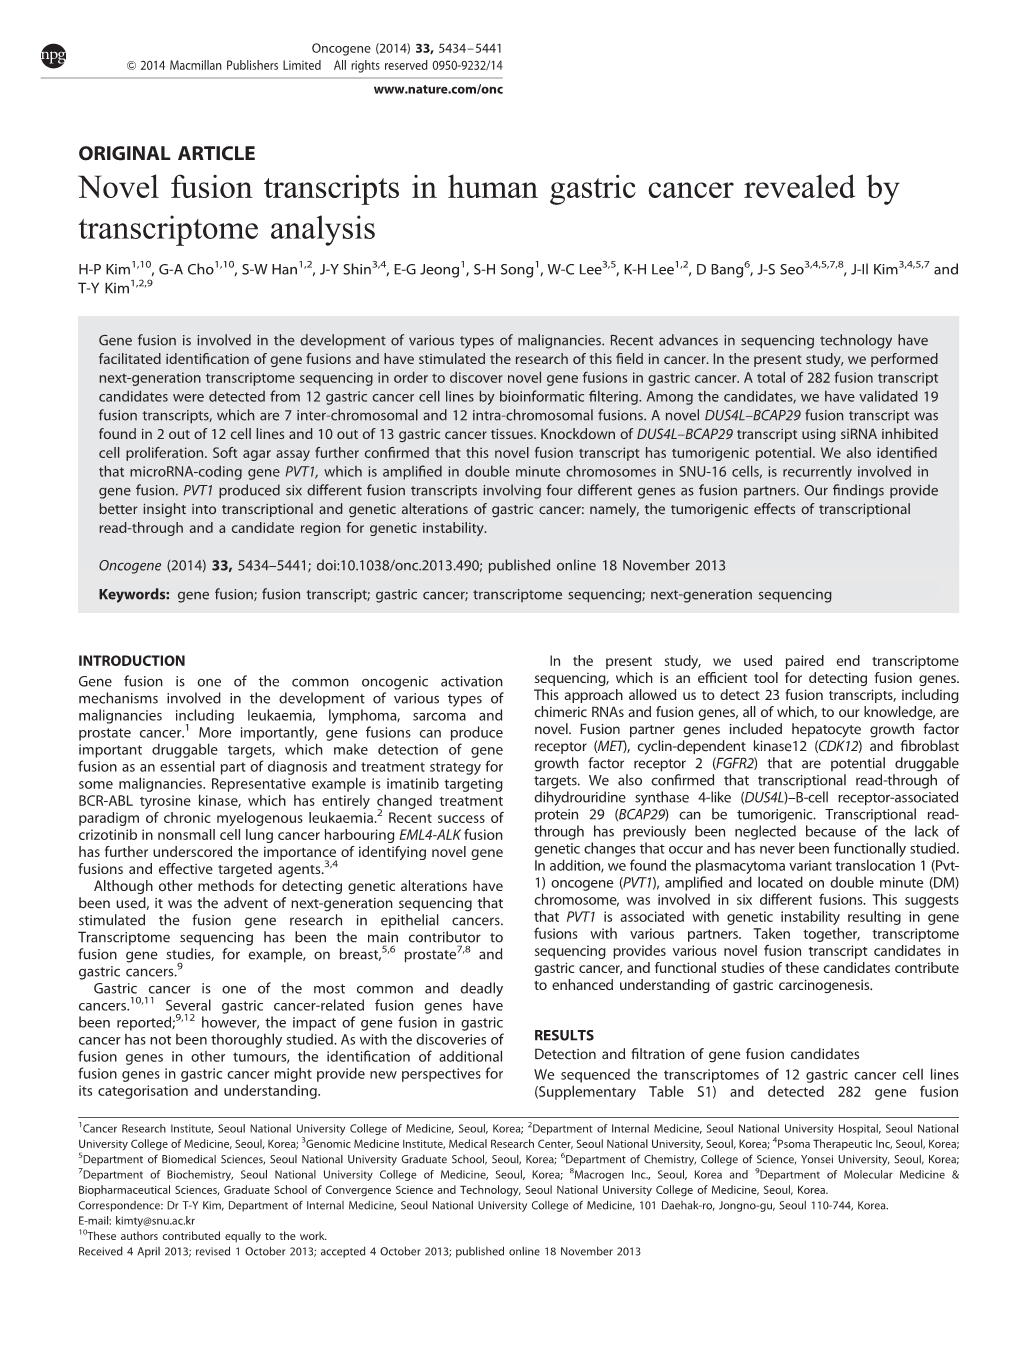 Novel Fusion Transcripts in Human Gastric Cancer Revealed by Transcriptome Analysis